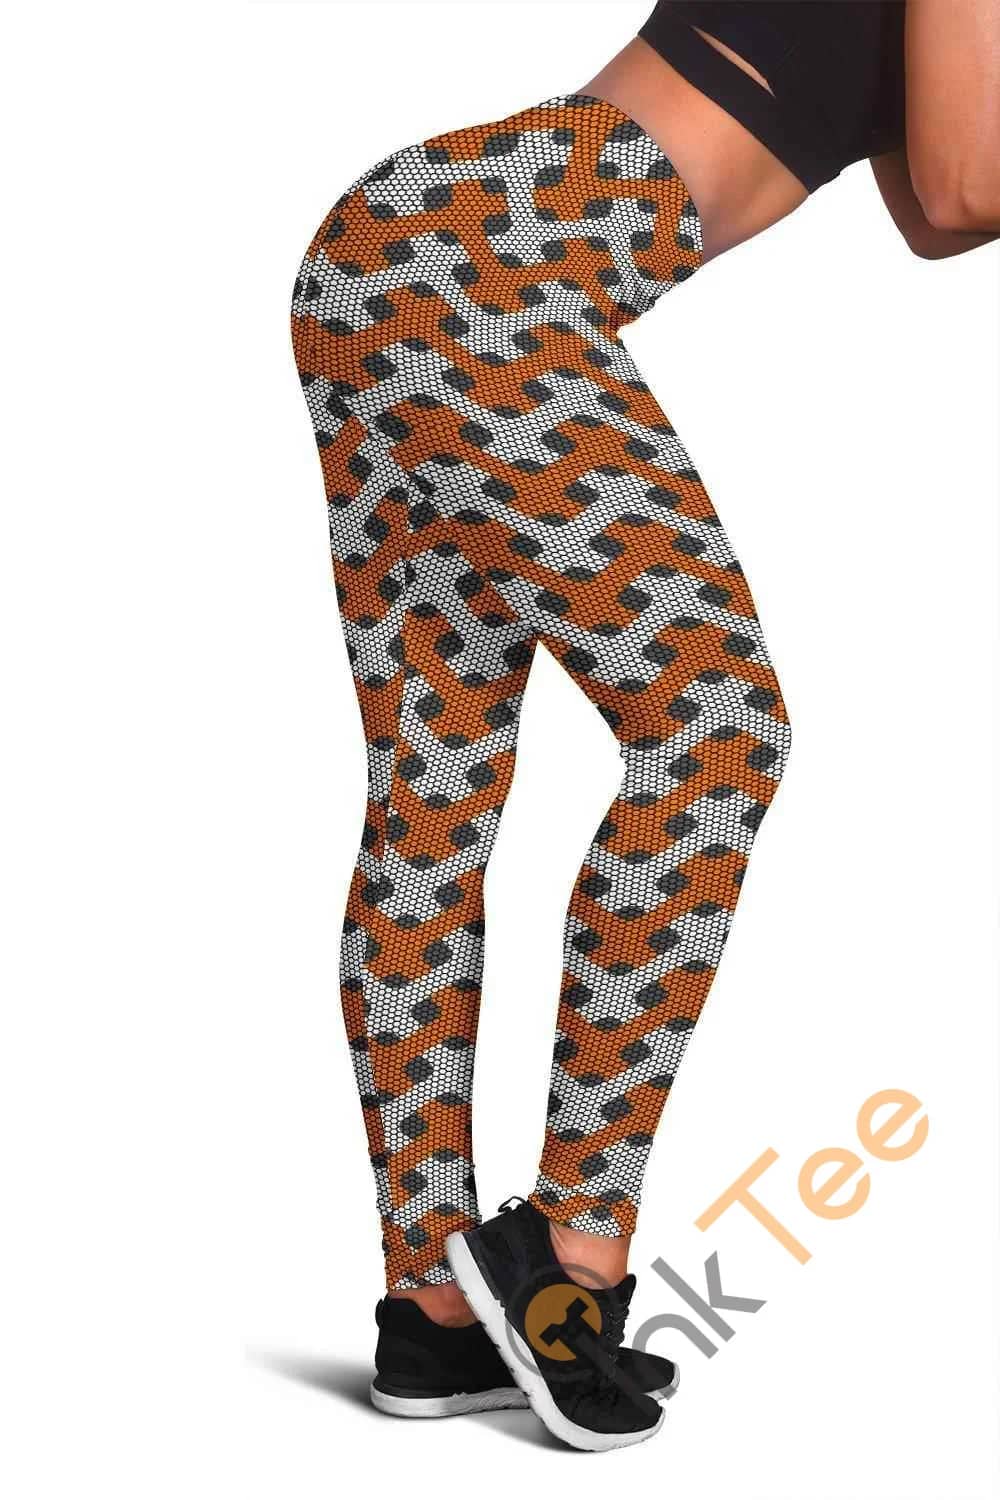 Tennessee Volunteers Inspired 3D All Over Print For Yoga Fitness Fashion Women's Leggings